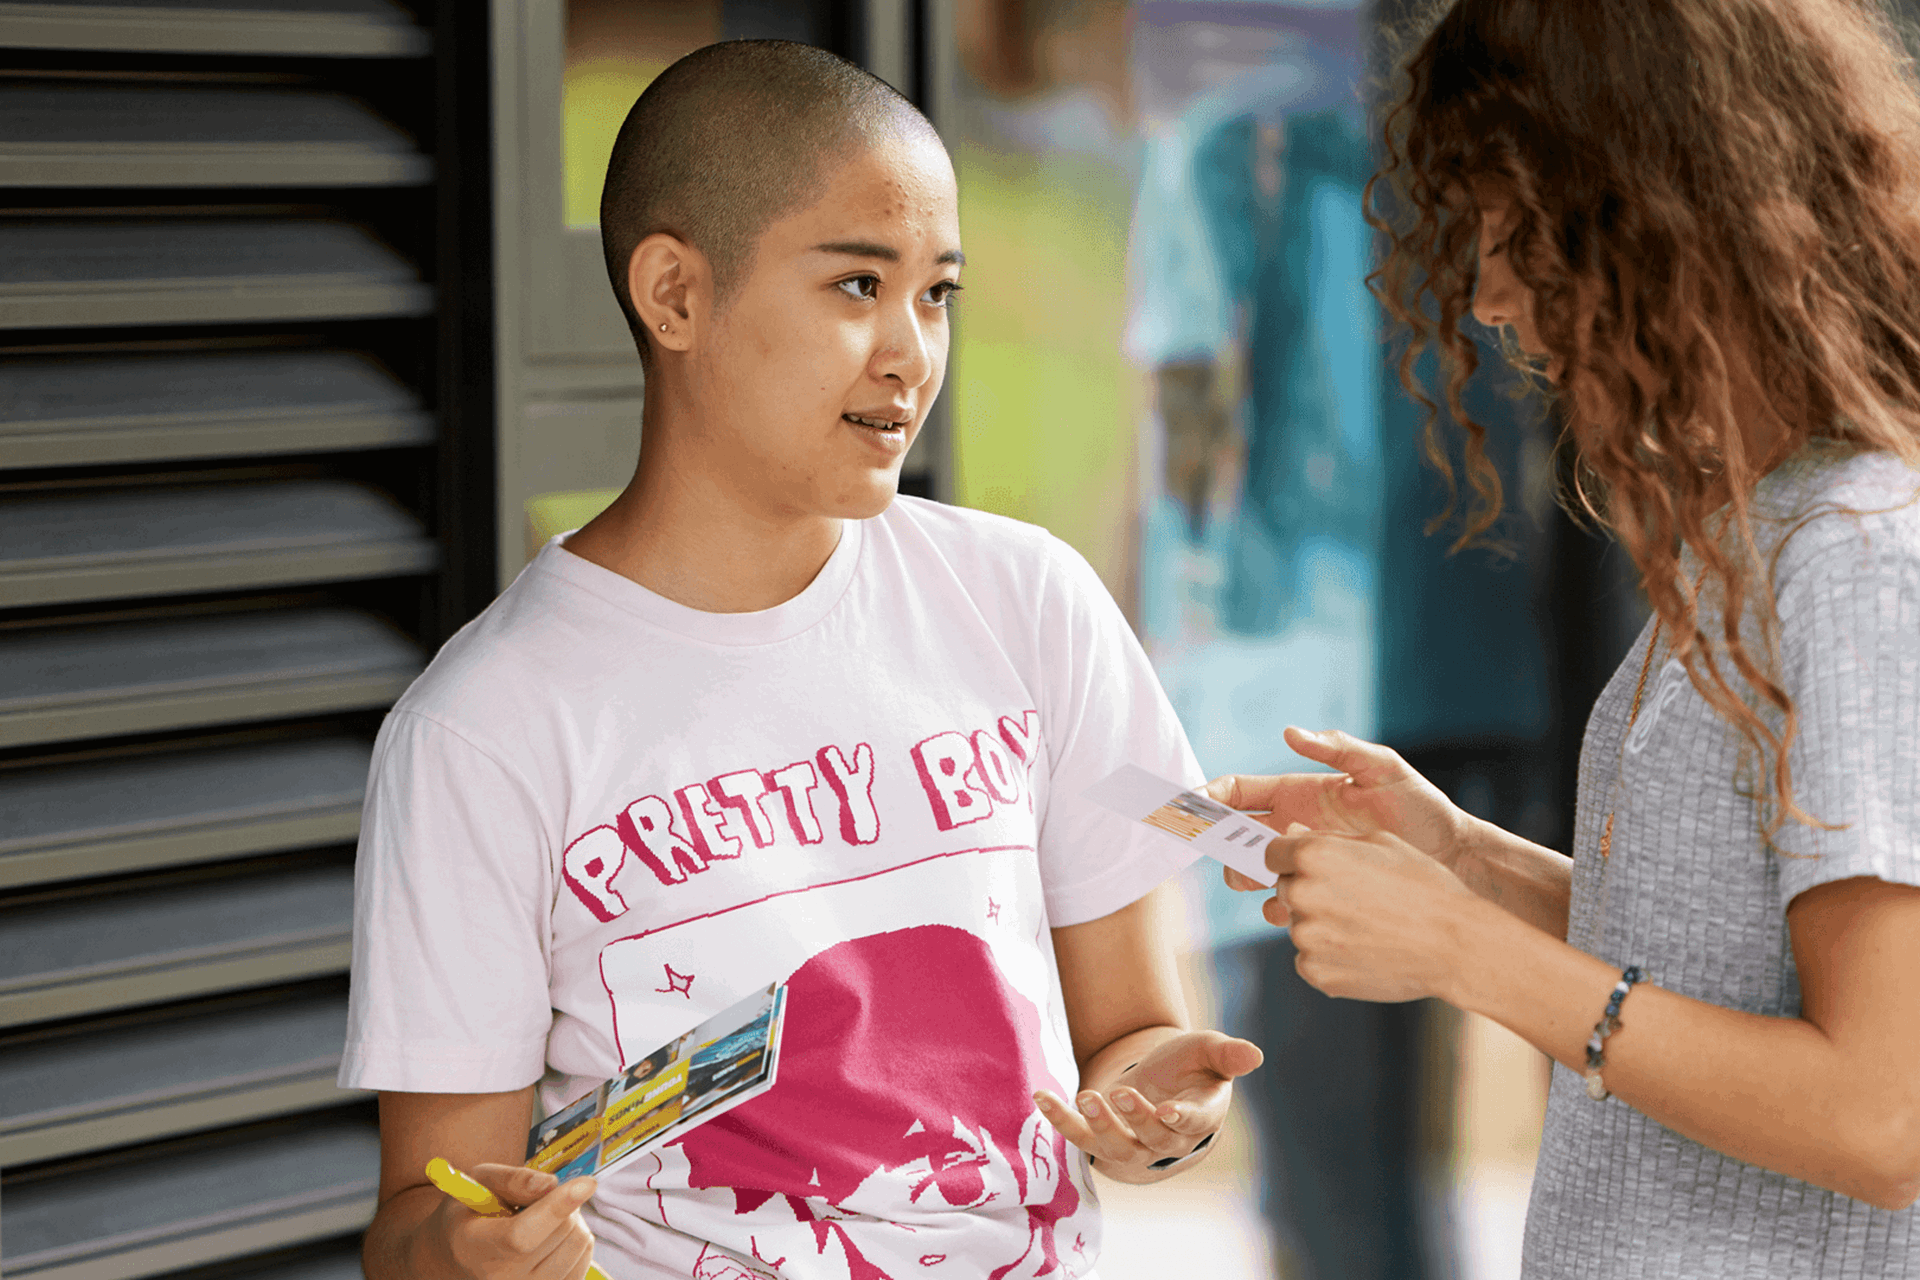 medium-shot-of-a-young-woman-with-shaved-head-holding-some-flyers-talking-to-another-girl-with-curly-hair-and-face-unseen-inside-campus